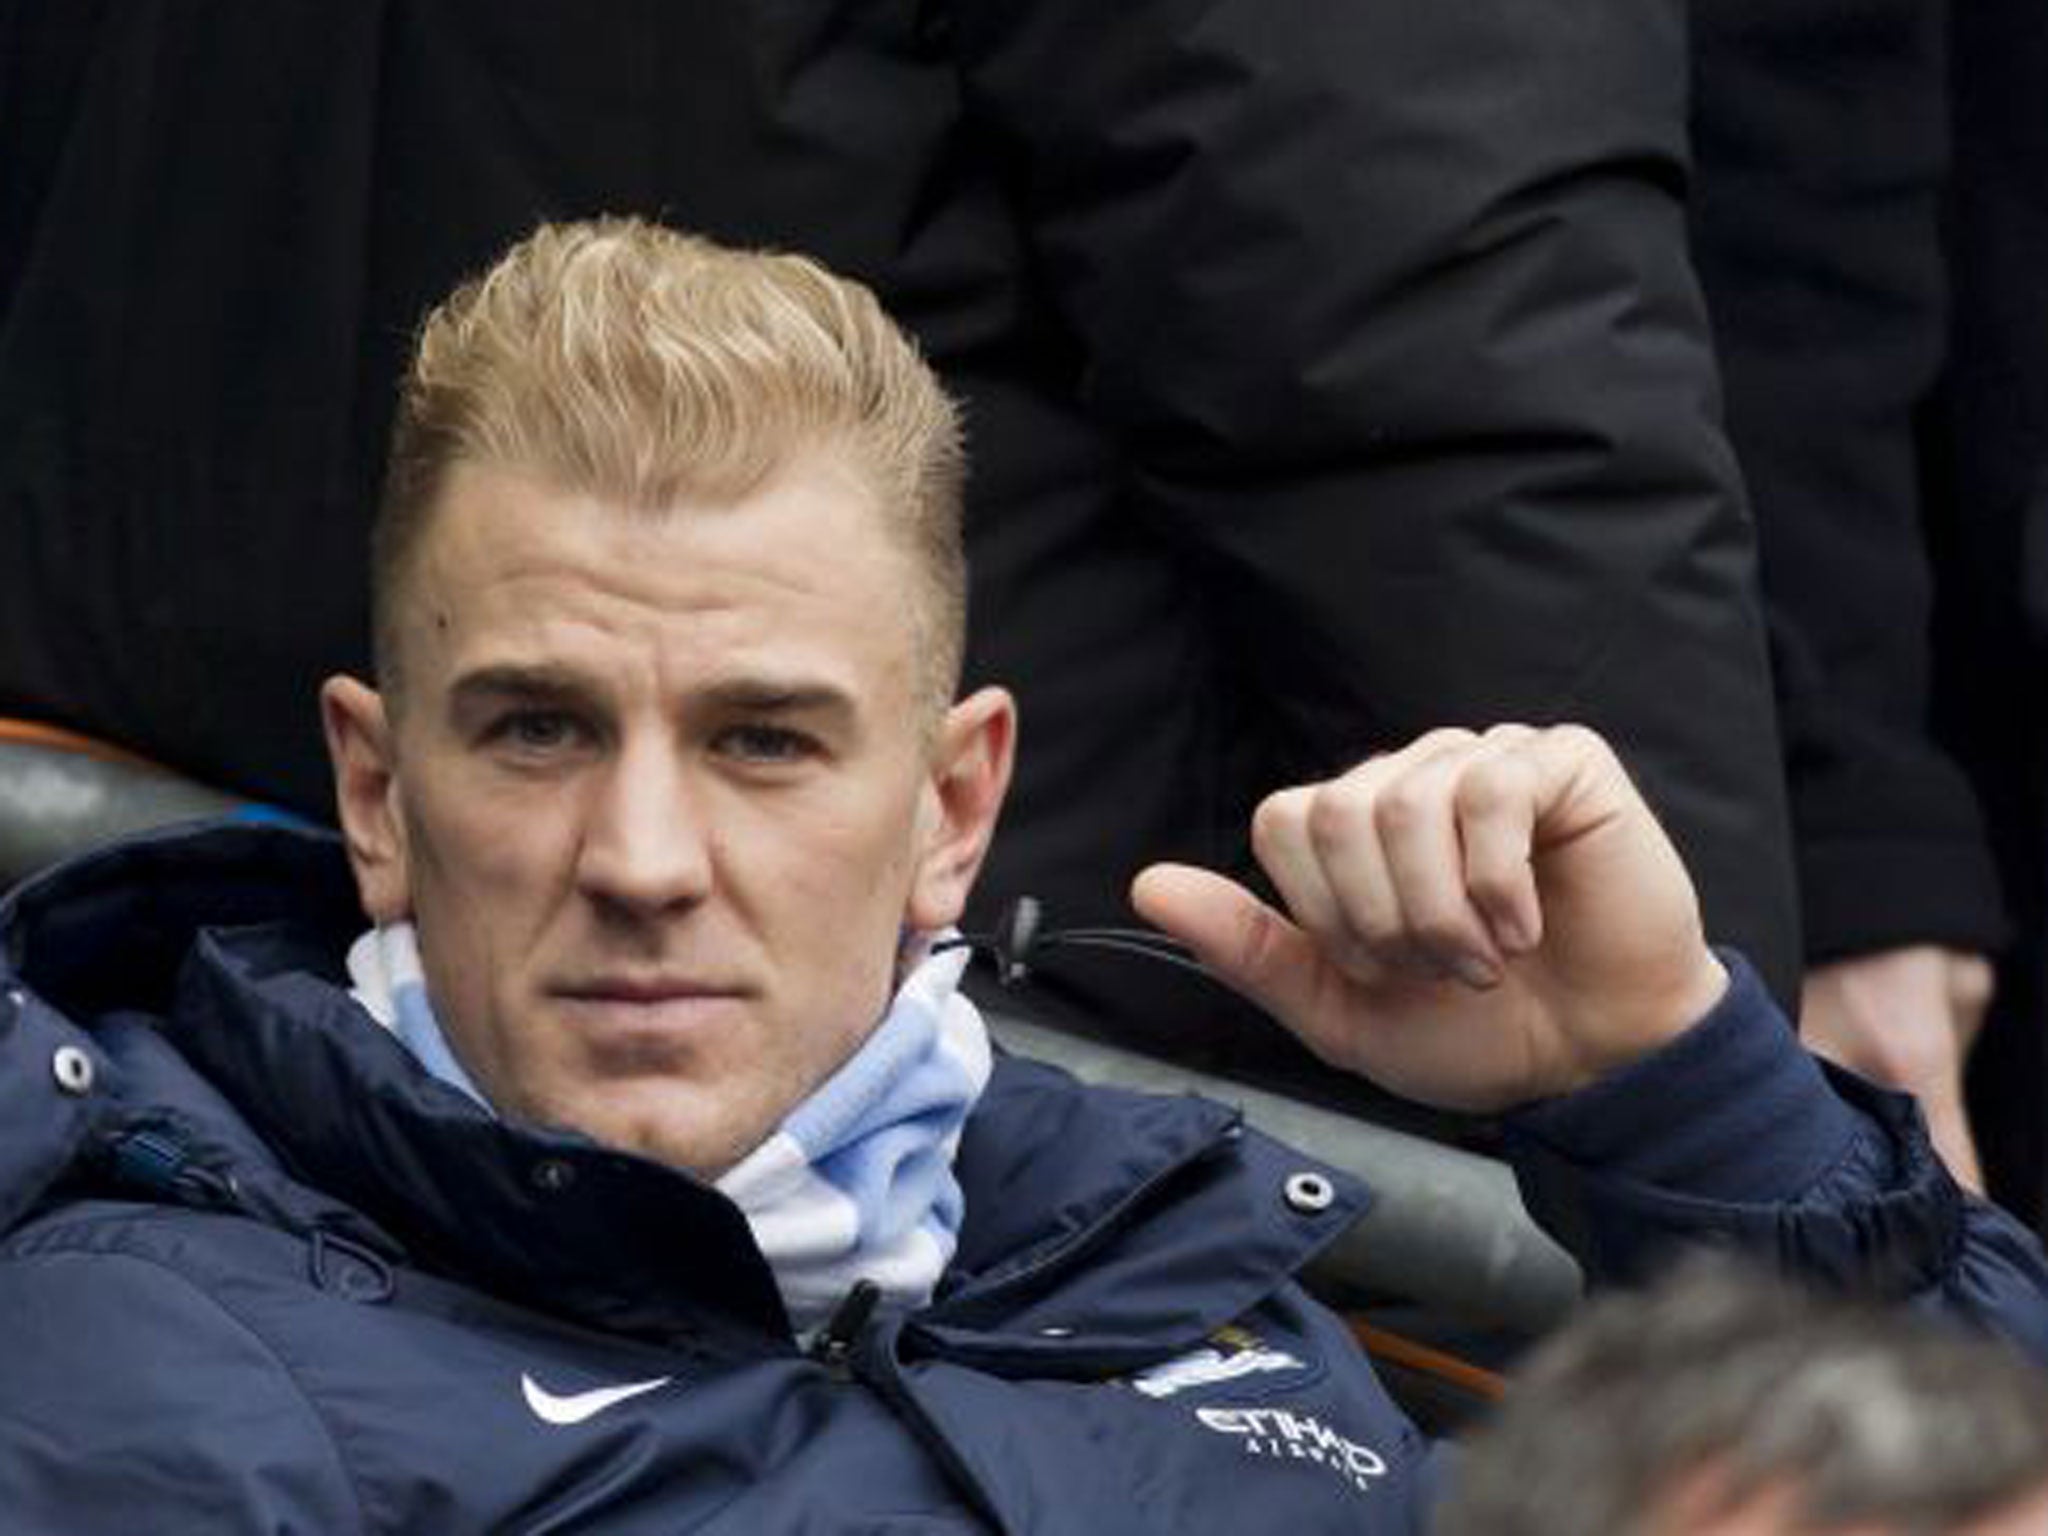 Joe Hart puts on a brave face about sitting on the bench on Saturday after being dropped by Manchester City